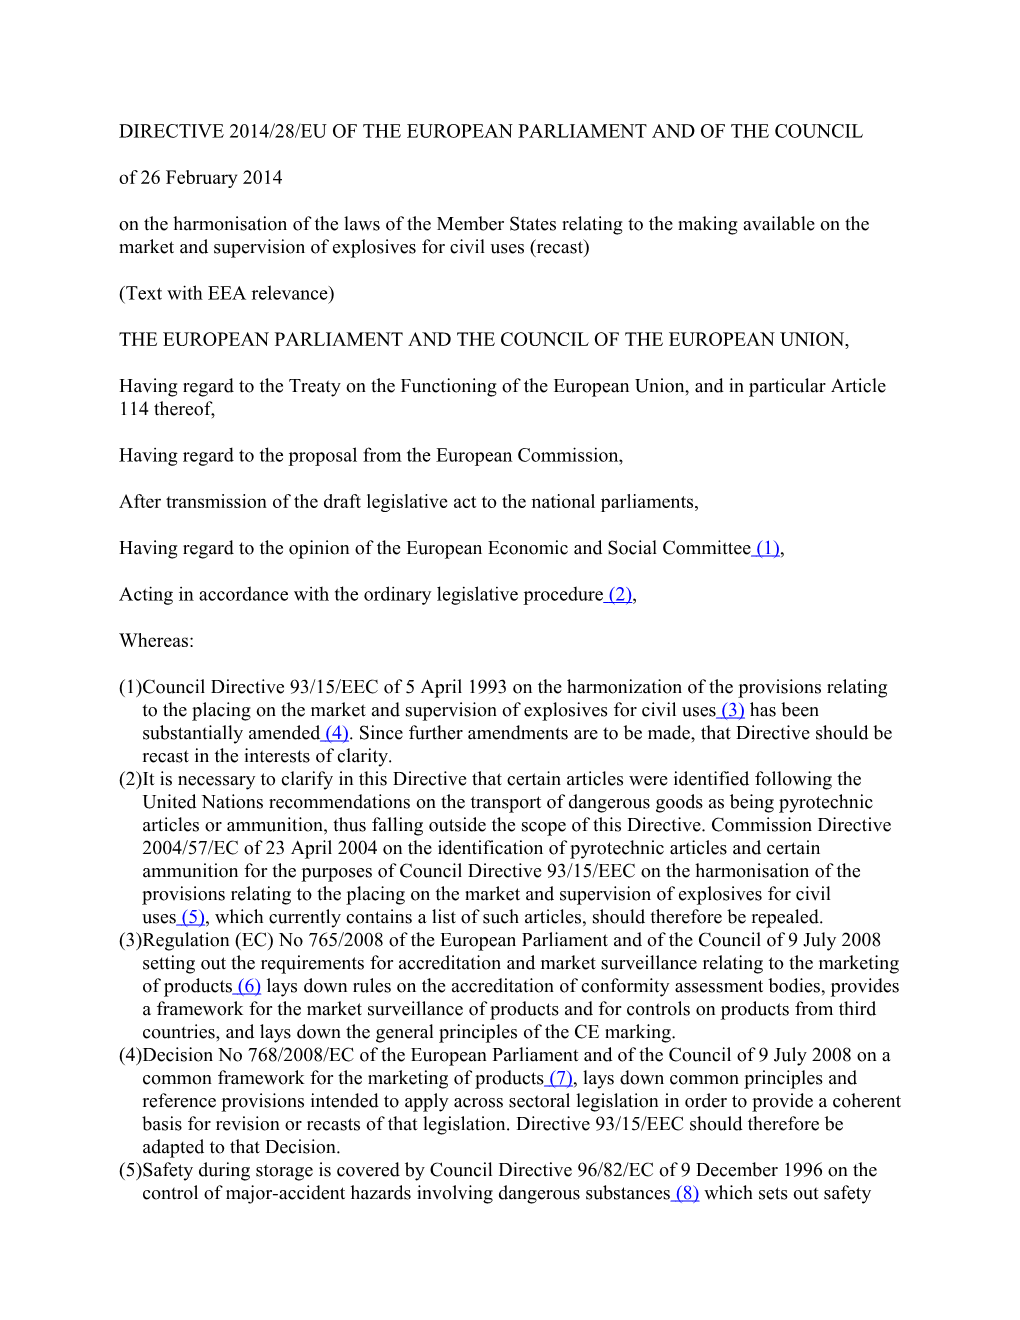 Directive 2014/28/Eu of the European Parliament and of the Council